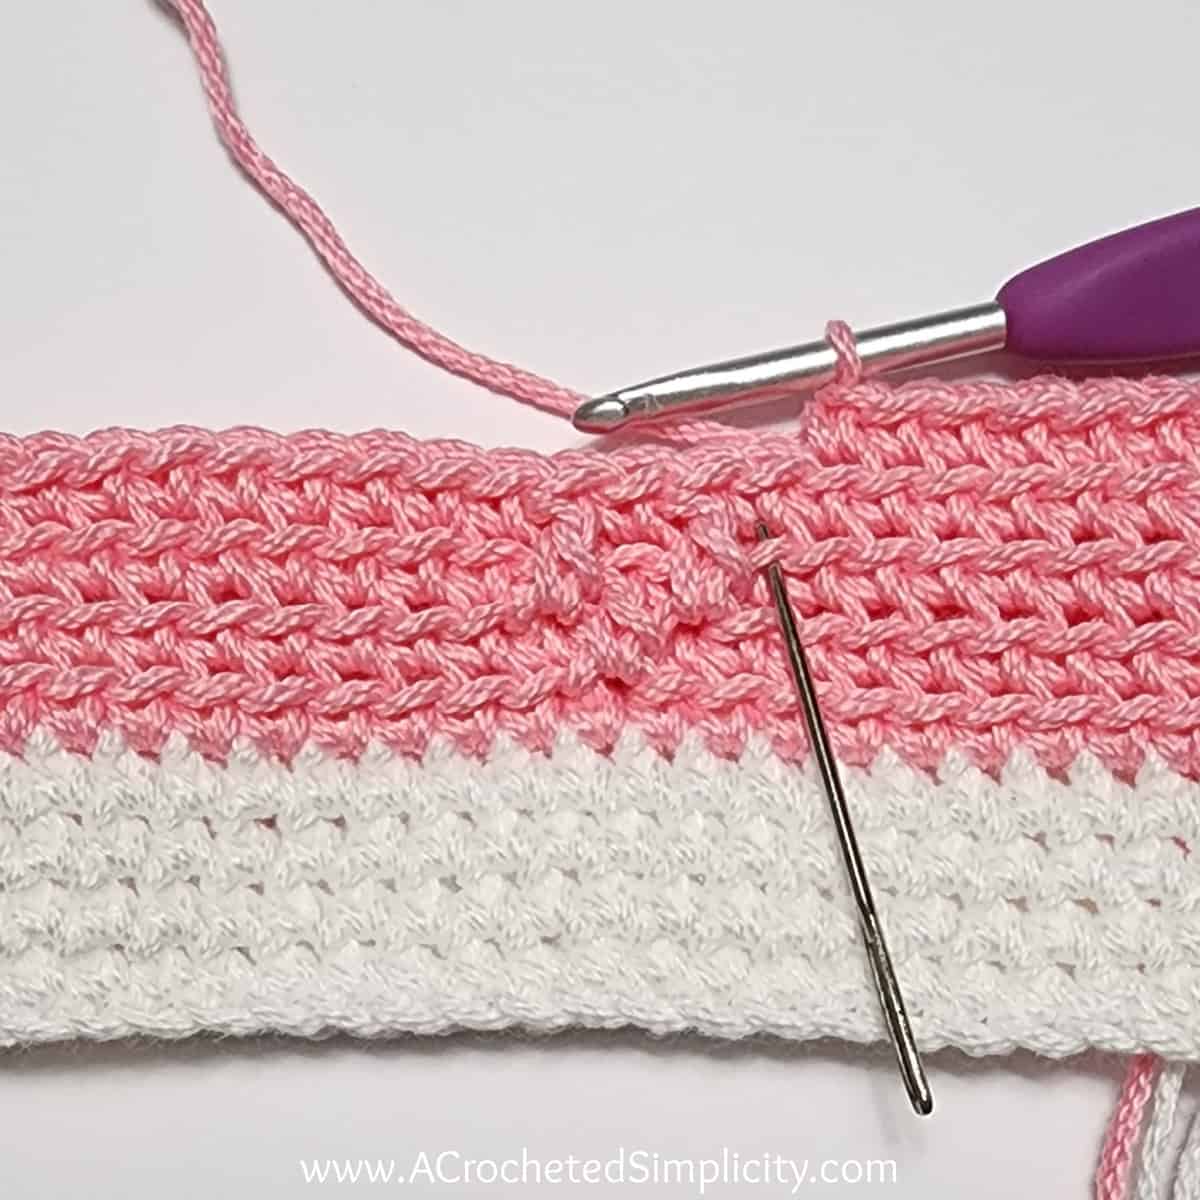 Crochet Valentine's Day treat bag tutorial photo in pink and white yarn showing where to work the next stitch in round 3.